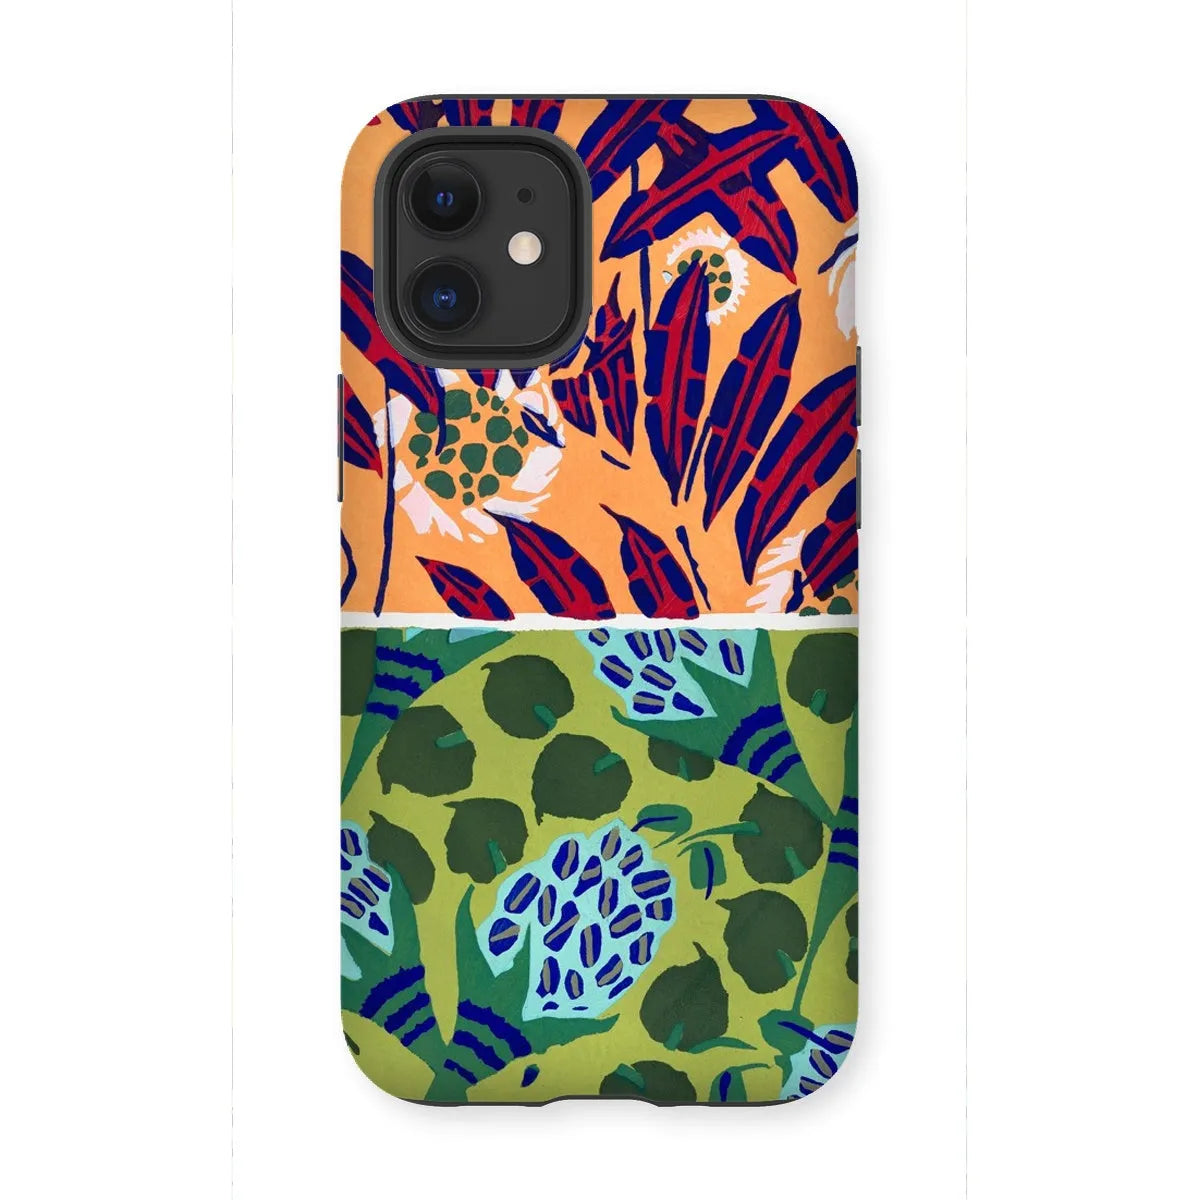 Fabric & Rugs Too - Pochoir Pattern Phone Case - E. A. Séguy - Iphone 12 Mini / Matte - Mobile Phone Cases